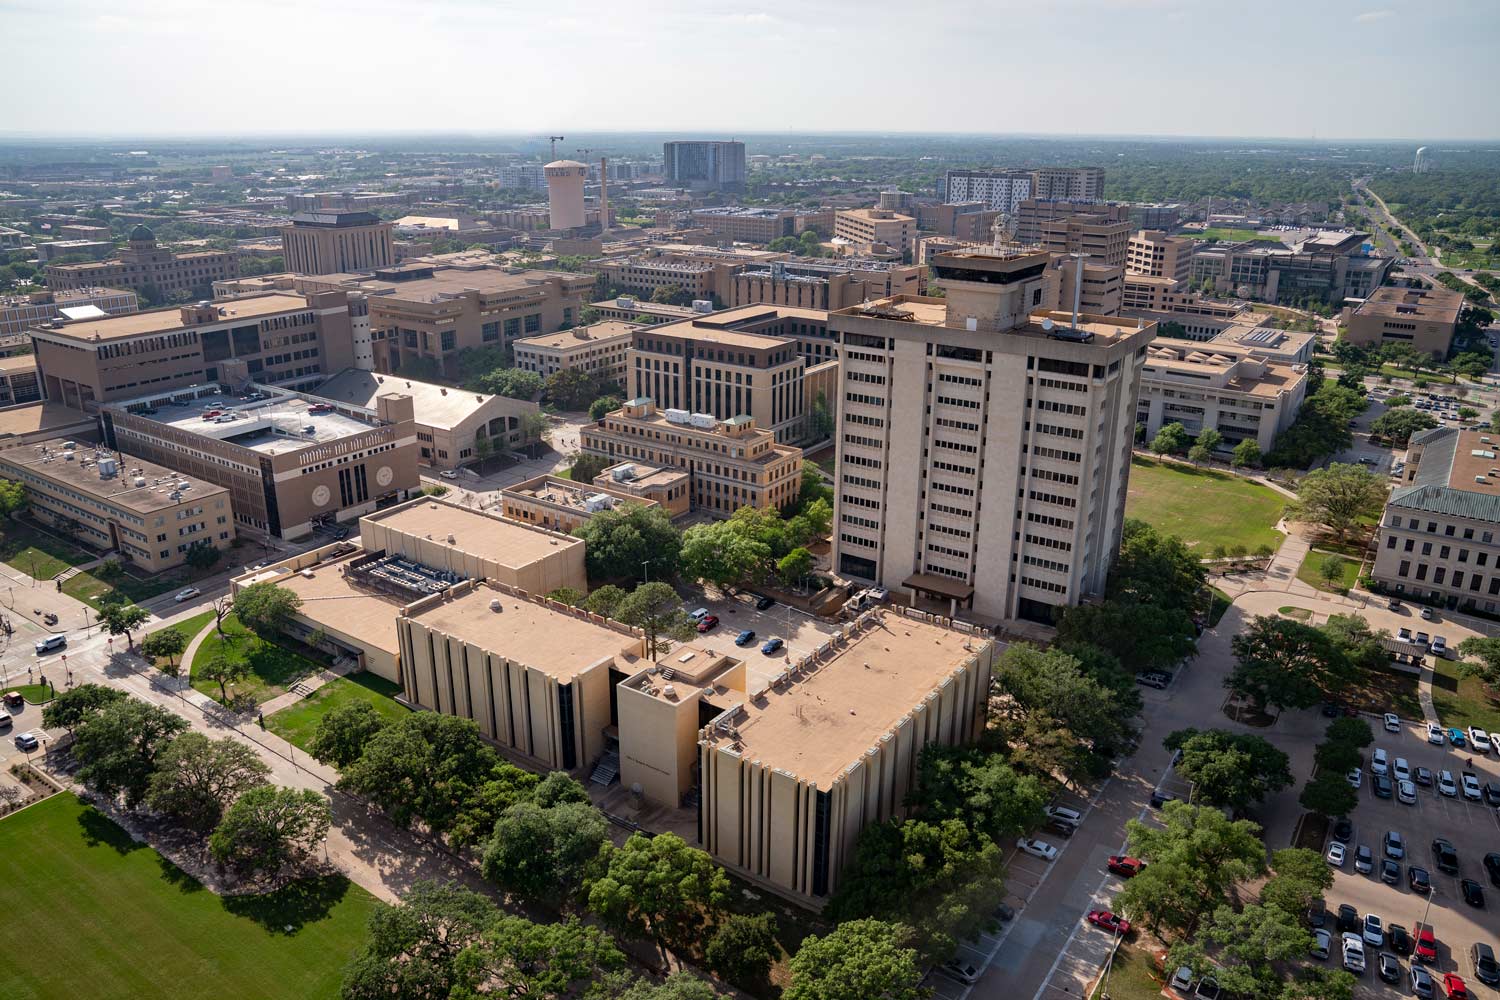 Aerial view of the Texas A&M Campus with focus on the Oceanography building